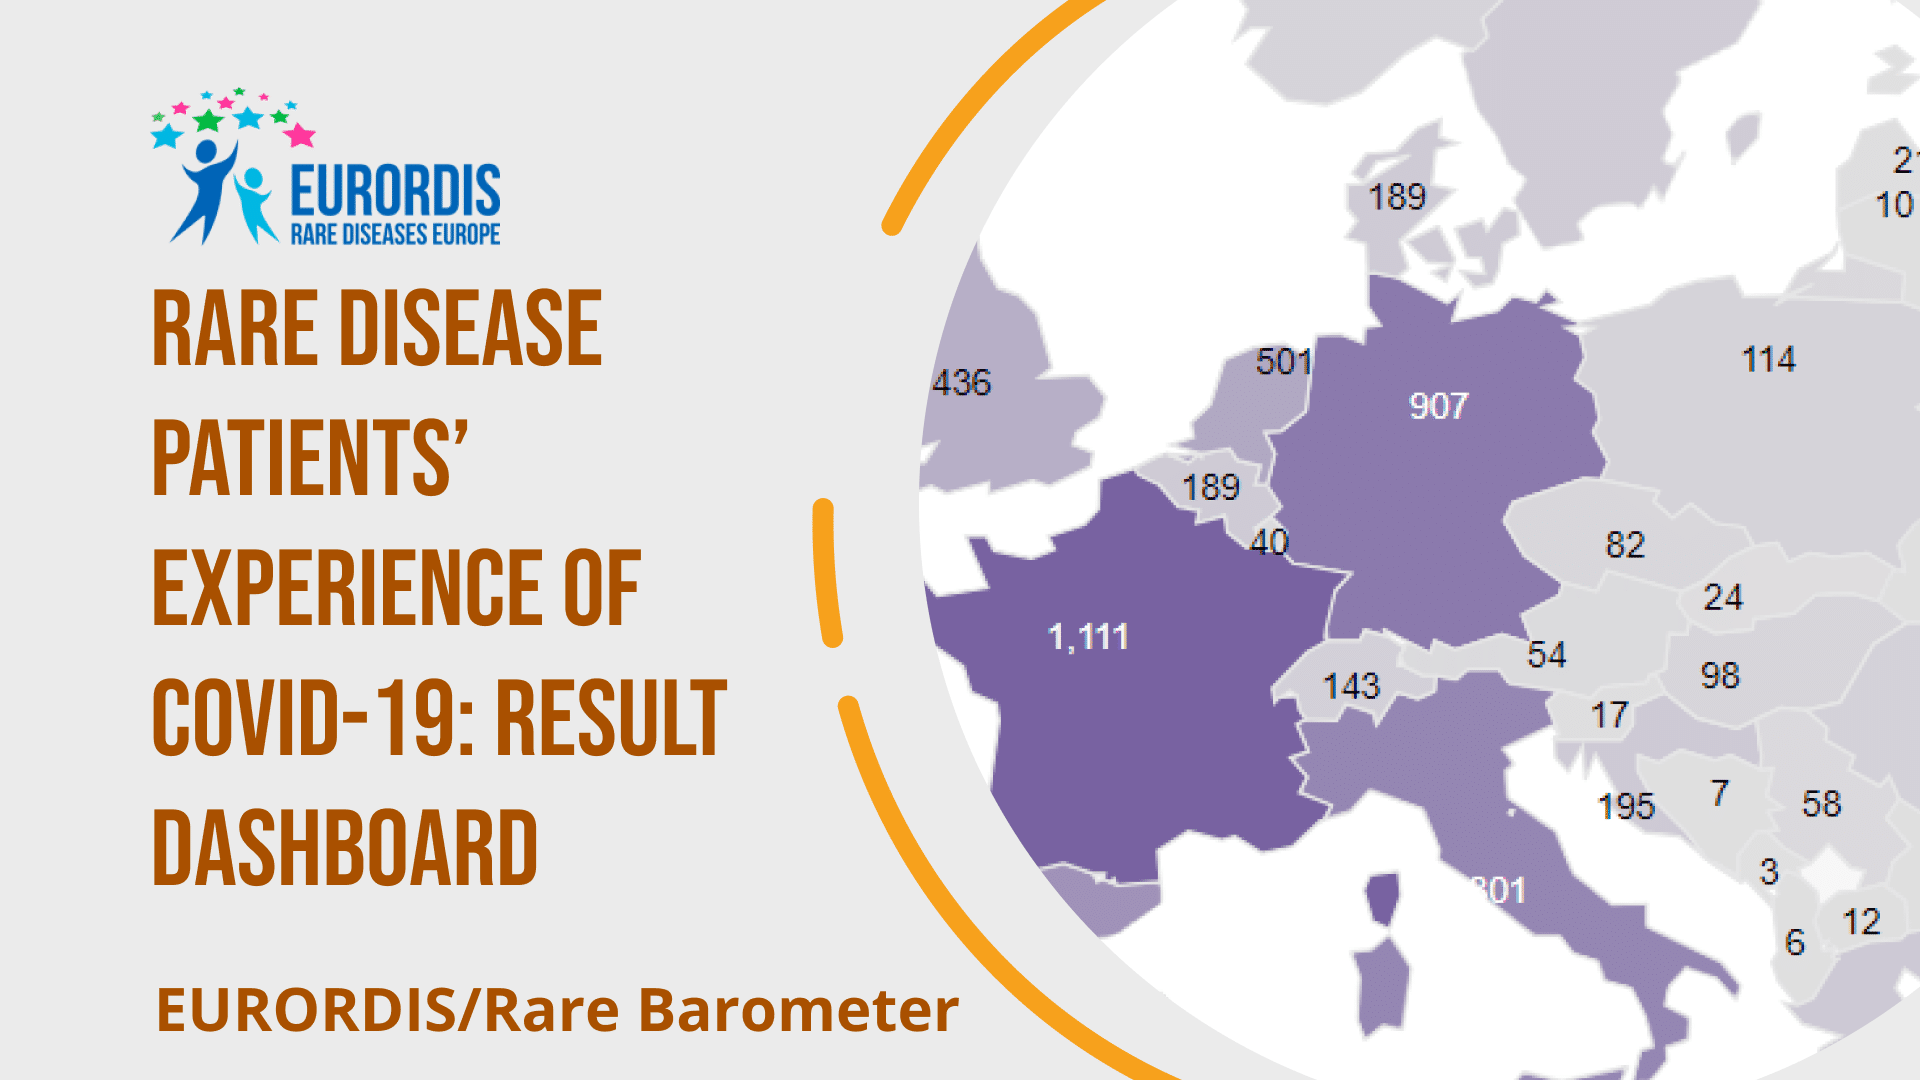 Rare disease patients’ experience of COVID-19: result dashboard